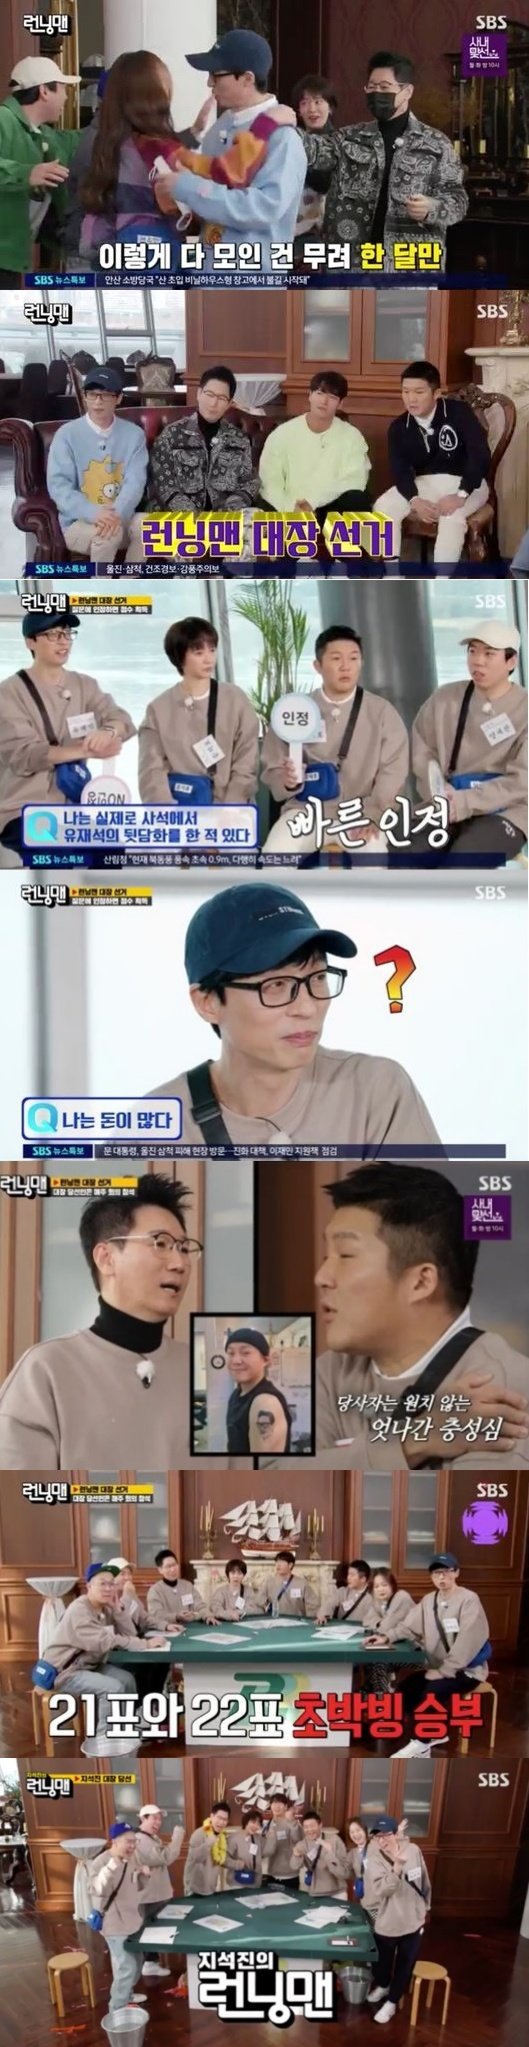 SBS Running Man has been changed to Ji Suk-jins Running Man for a month.Running Man, which aired on the 6th, kept the top spot in the same time zone with a target index of 3.2% of the 2049 ratings (hereinafter based on Nielsen Korea metropolitan area and households), and the highest audience rating per minute jumped to 7.9%.When the members met in full in five weeks due to Corona 19, they were pleased to show off their high tension from the opening, but they attracted attention by mentioning What do you do when you play.What do you do when you play?When the recording schedule was changed due to the confirmation of the members of Running Man, Kim Jong-kook, who encountered it, said, What do you do when you play? And showed Anyang Koraji.Yoo Jae-Suk laughed, saying, I want you to go out of what do you play and do it here.On the same day, Race was decorated with Captain Election Race, which selects Running Man for four weeks, and comedian Jo Se-ho was a guest.When you become the Running Man captain, you will be marked for a month as Running Man of OOO, and you will receive exclusive filming of age notices, the decision to make lunch menus on the same day, the gift of luxury bottled water during recording, and the increase in the performance fee with only the captains R money.However, during the term, you should participate in the production team meeting held at Mokdong SBS once a week to provide ideas.The first mission was a no-deal yes entry hearing that took one point to admit the questions.With interesting questions pouring in, Jeon So-min did not admit to the question, I am afraid to confess to Yang Se-chan, and Jo Se-ho has actually talked about the back of Yoo Jae-Suk in private, Jeon So-min and Song Ji-hyo do not both in my sexuality, Kim Jong- I did not want to see Kook, I hesitated to meet Running Man, Entertainment ability is senior, Ji Suk-jin is a great man and role model to me, and I swept the score.On the other hand, Yoo Jae-Suk quickly admitted to the word I am rich but did not admit to the reaction that I should talk about property.In the next mission, Minica Race, Jo Se-ho of the two decided to resign, with Jeon So-min and Jo Se-ho winning.Jo Se-ho backed Yoo Jae-Suk; after that Song Ji-hyo resigned and declared his support for Haha and entered the final campaign with everyone reluctant to take over as captain.Ji Suk-jin felt that he was not impressed with his support tax and laughed at the members, saying, I really do not have time.The scene was the highest audience rating of 7.9% per minute, accounting for the best one minute.In the end, due to Jo Se-hos vote in the final vote, Ji Suk-jin was elected to the Running Man leader over Haha by one vote, and the Ji Suk-jins Running Man era was launched.